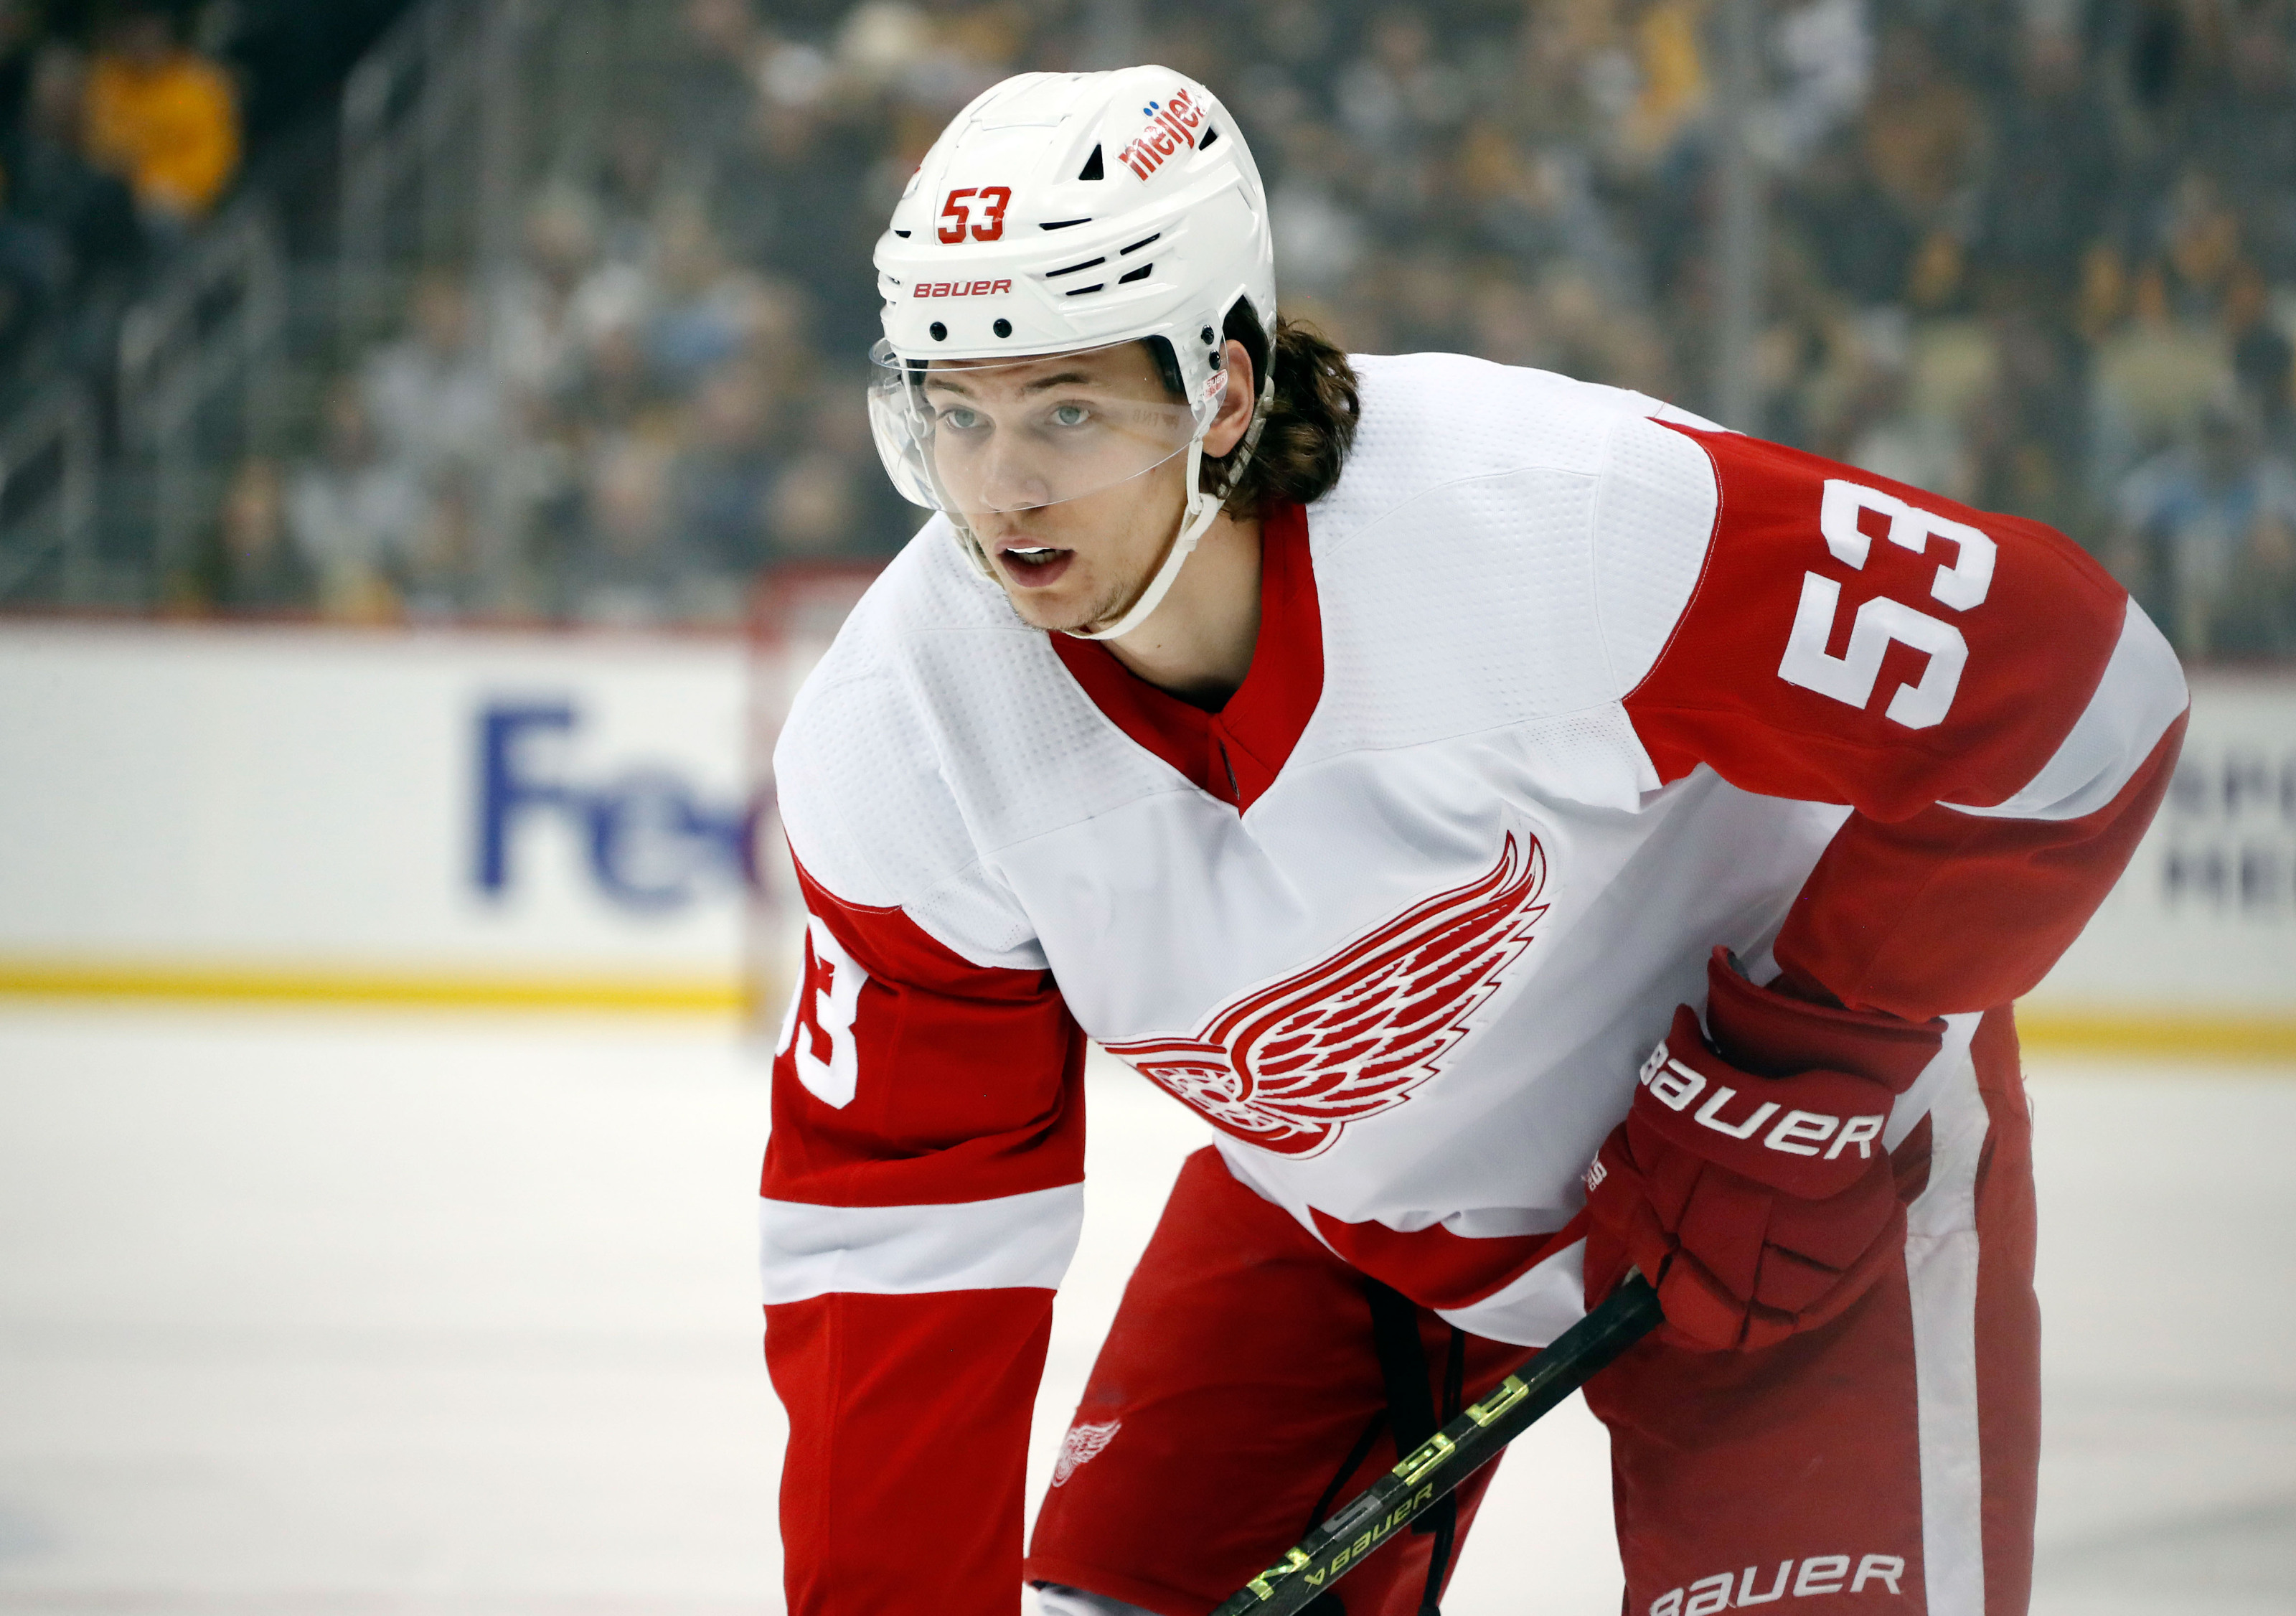 Detroit Red Wings: Moritz Seider has been a force on both ends of the ice